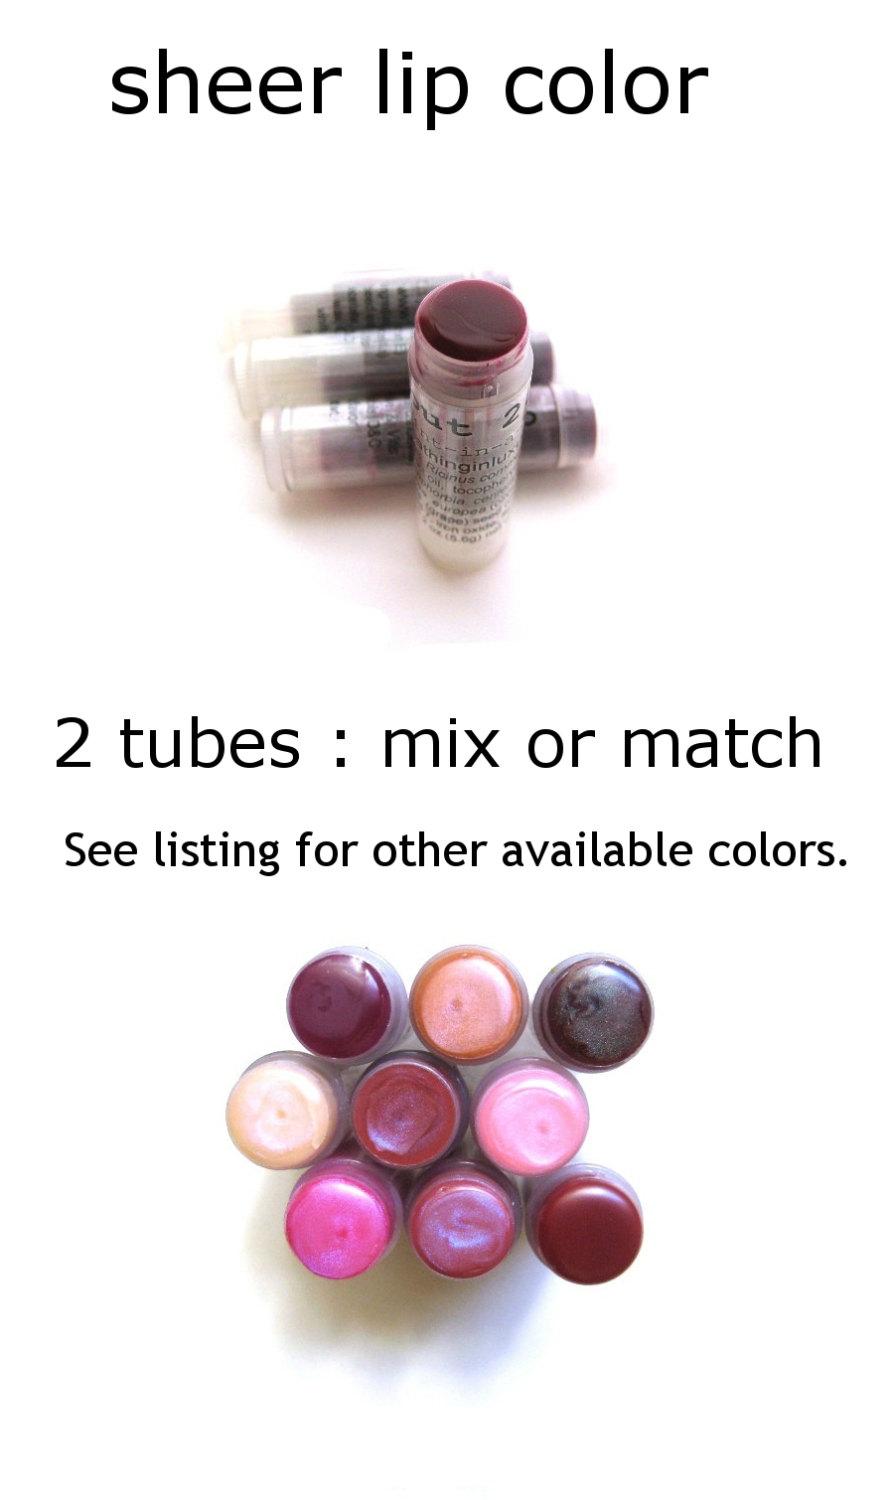 Свадьба - Lip Tint 2 Blackberry Lip Tint lip balm Sheer Lip Color Natural sunkiss look any 2 lip tints Mix or Match girlfriend gift for her wife gift